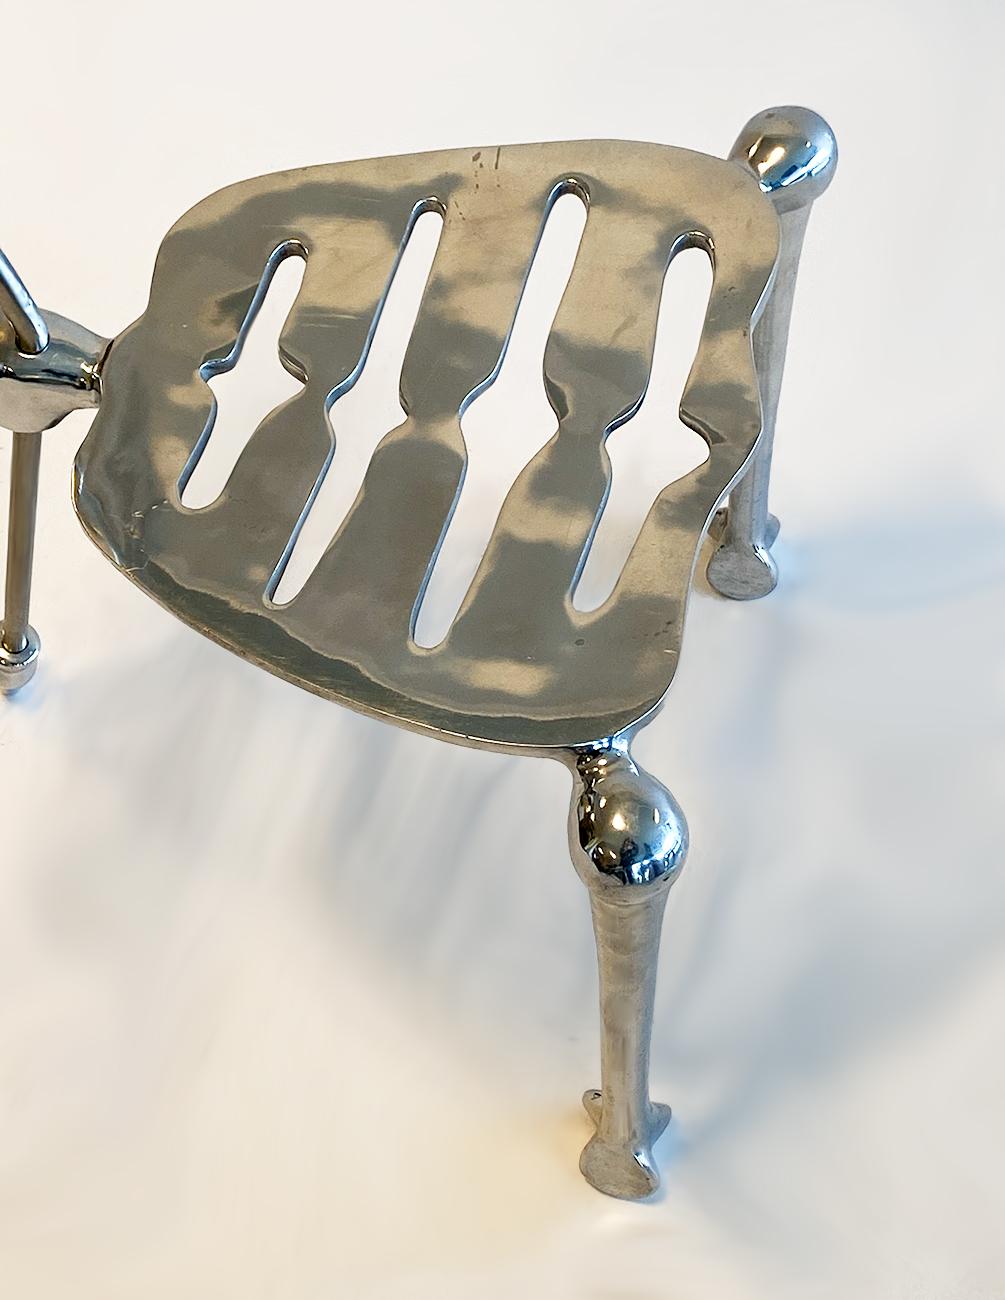 Modern Pair of Skeleton Chairs by Michael Aram Aluminum and Stainless Steel